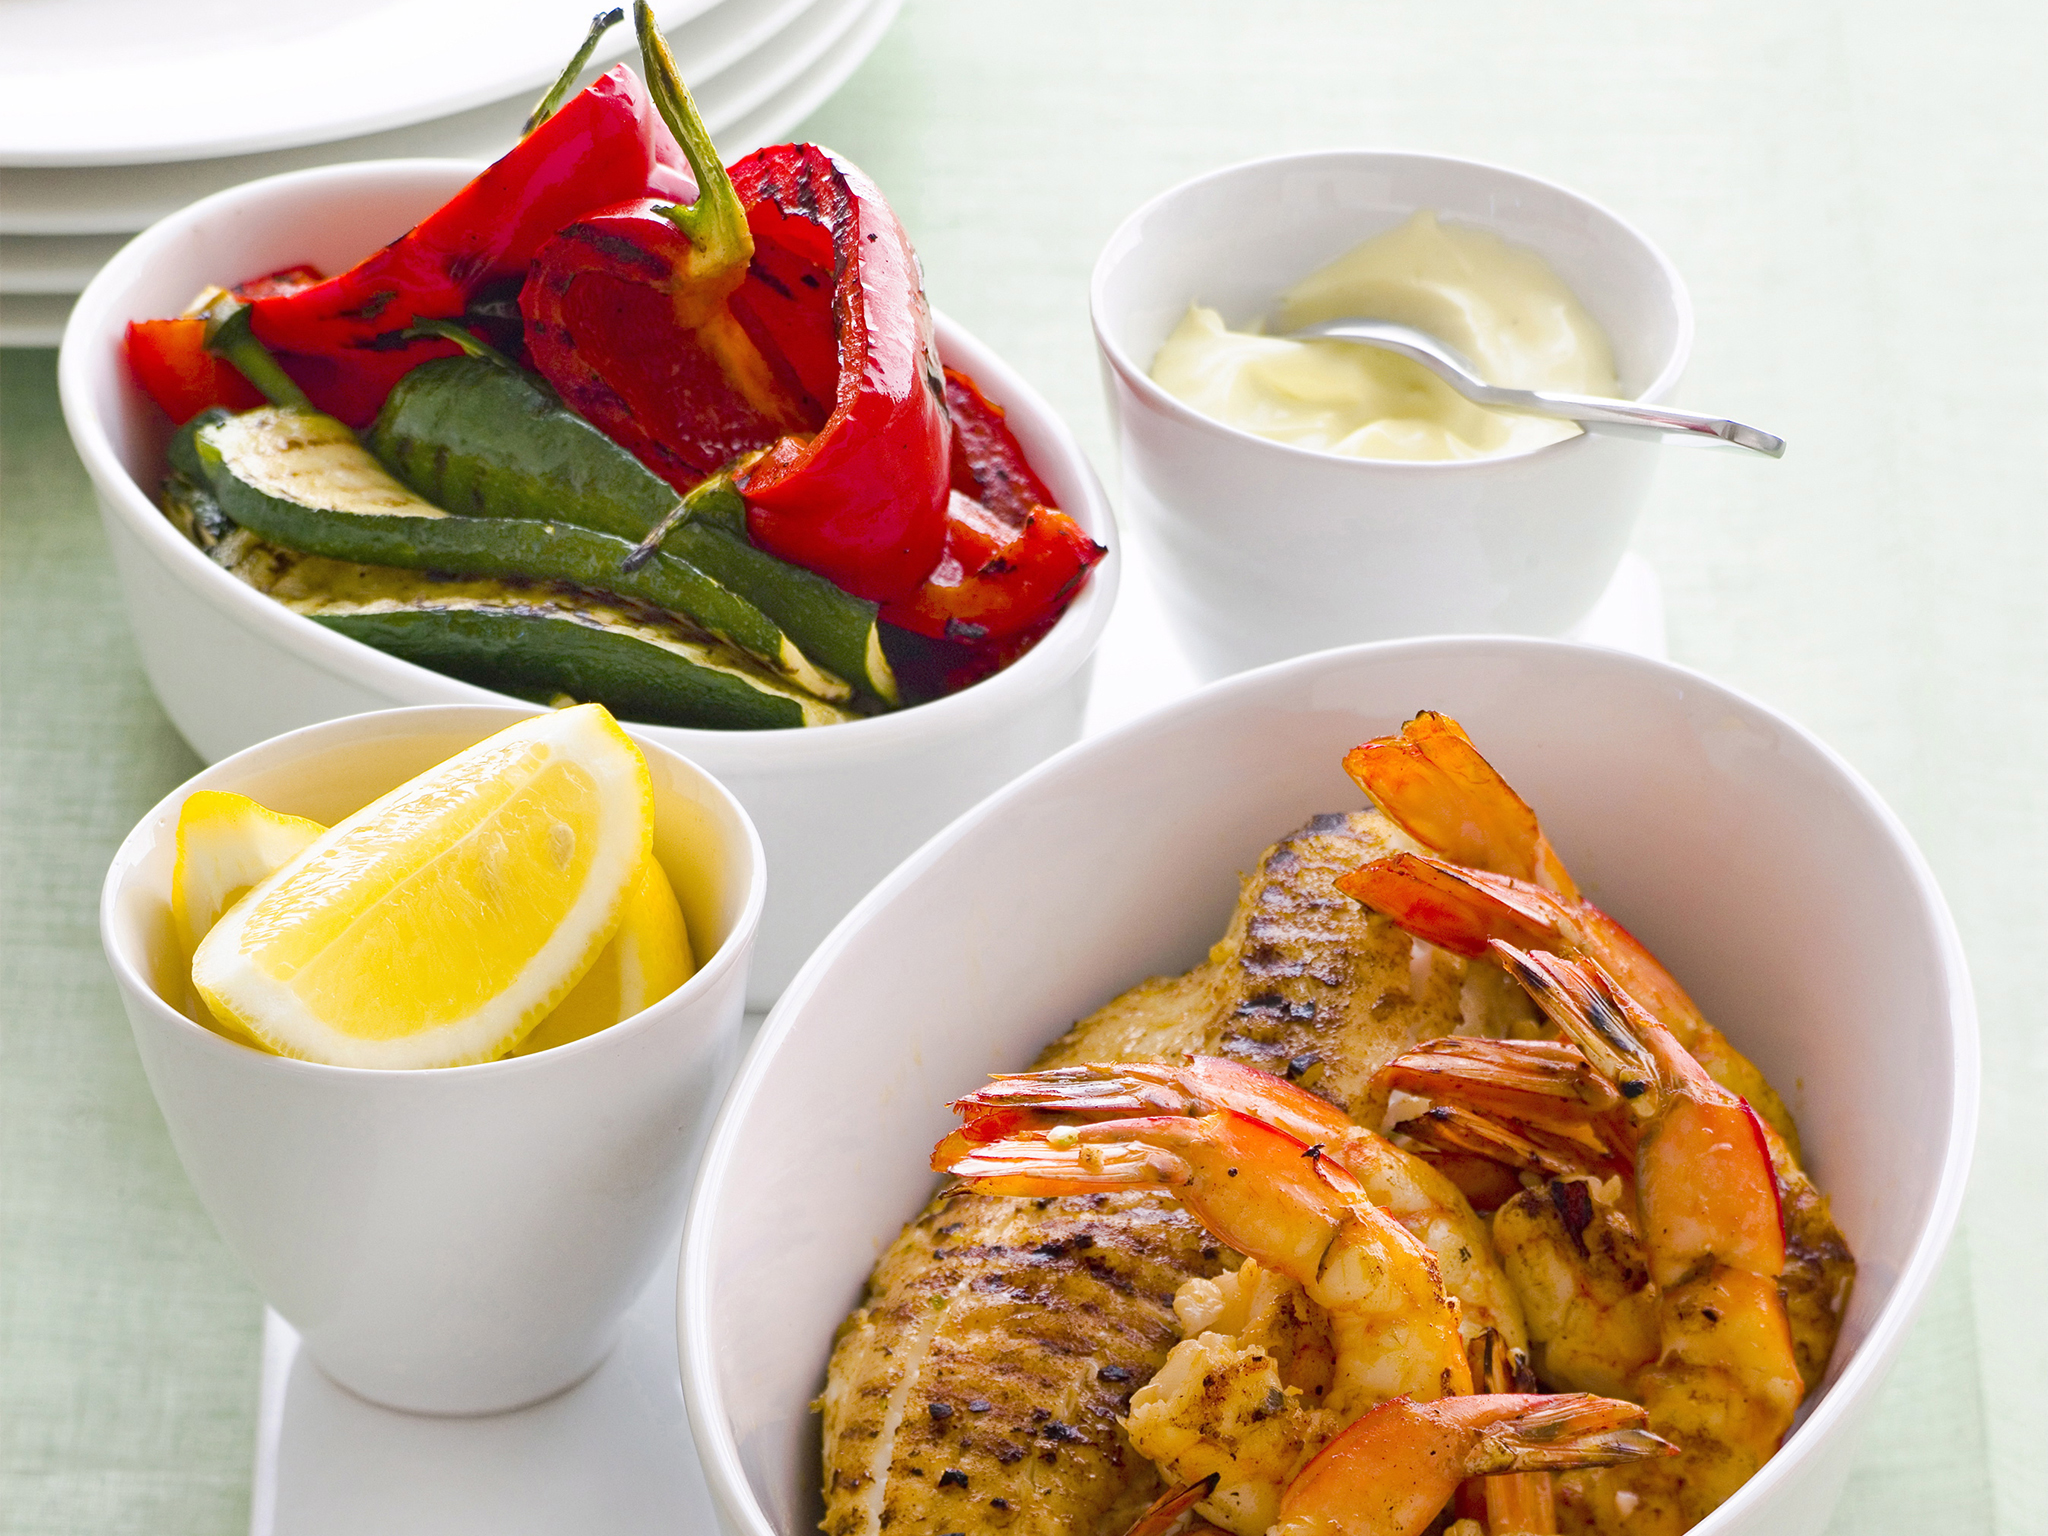 Spanish-Style Barbecued Seafood with Garlicky Mayonnaise